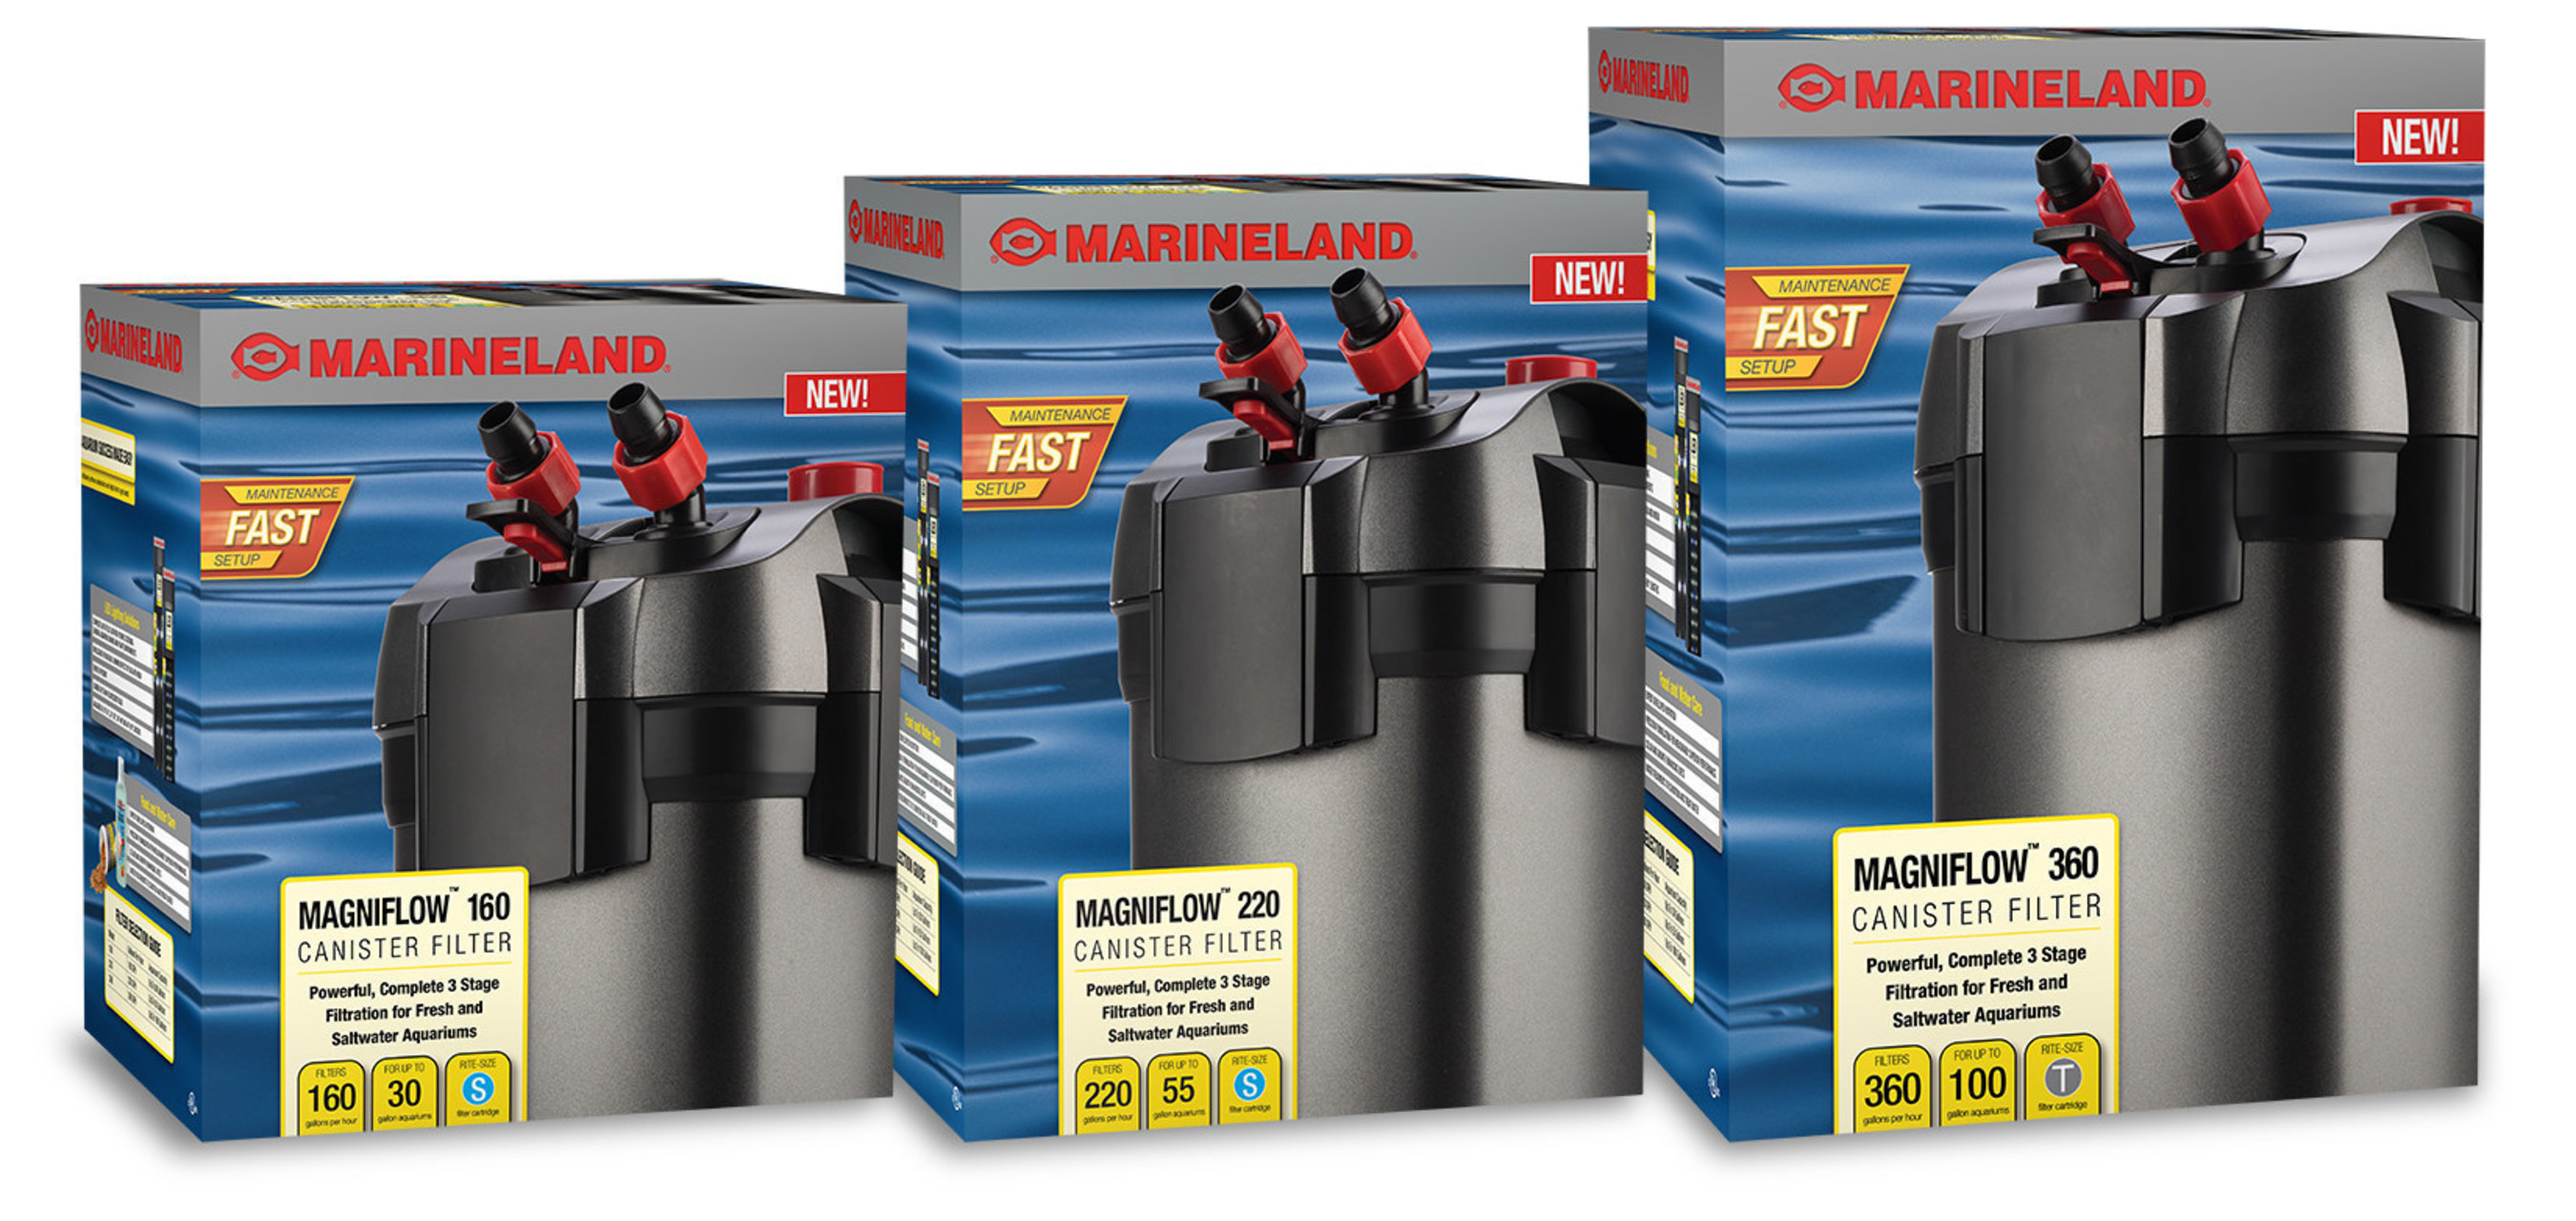 Marineland® Brand Introduces New Magniflow™ Canister Filter